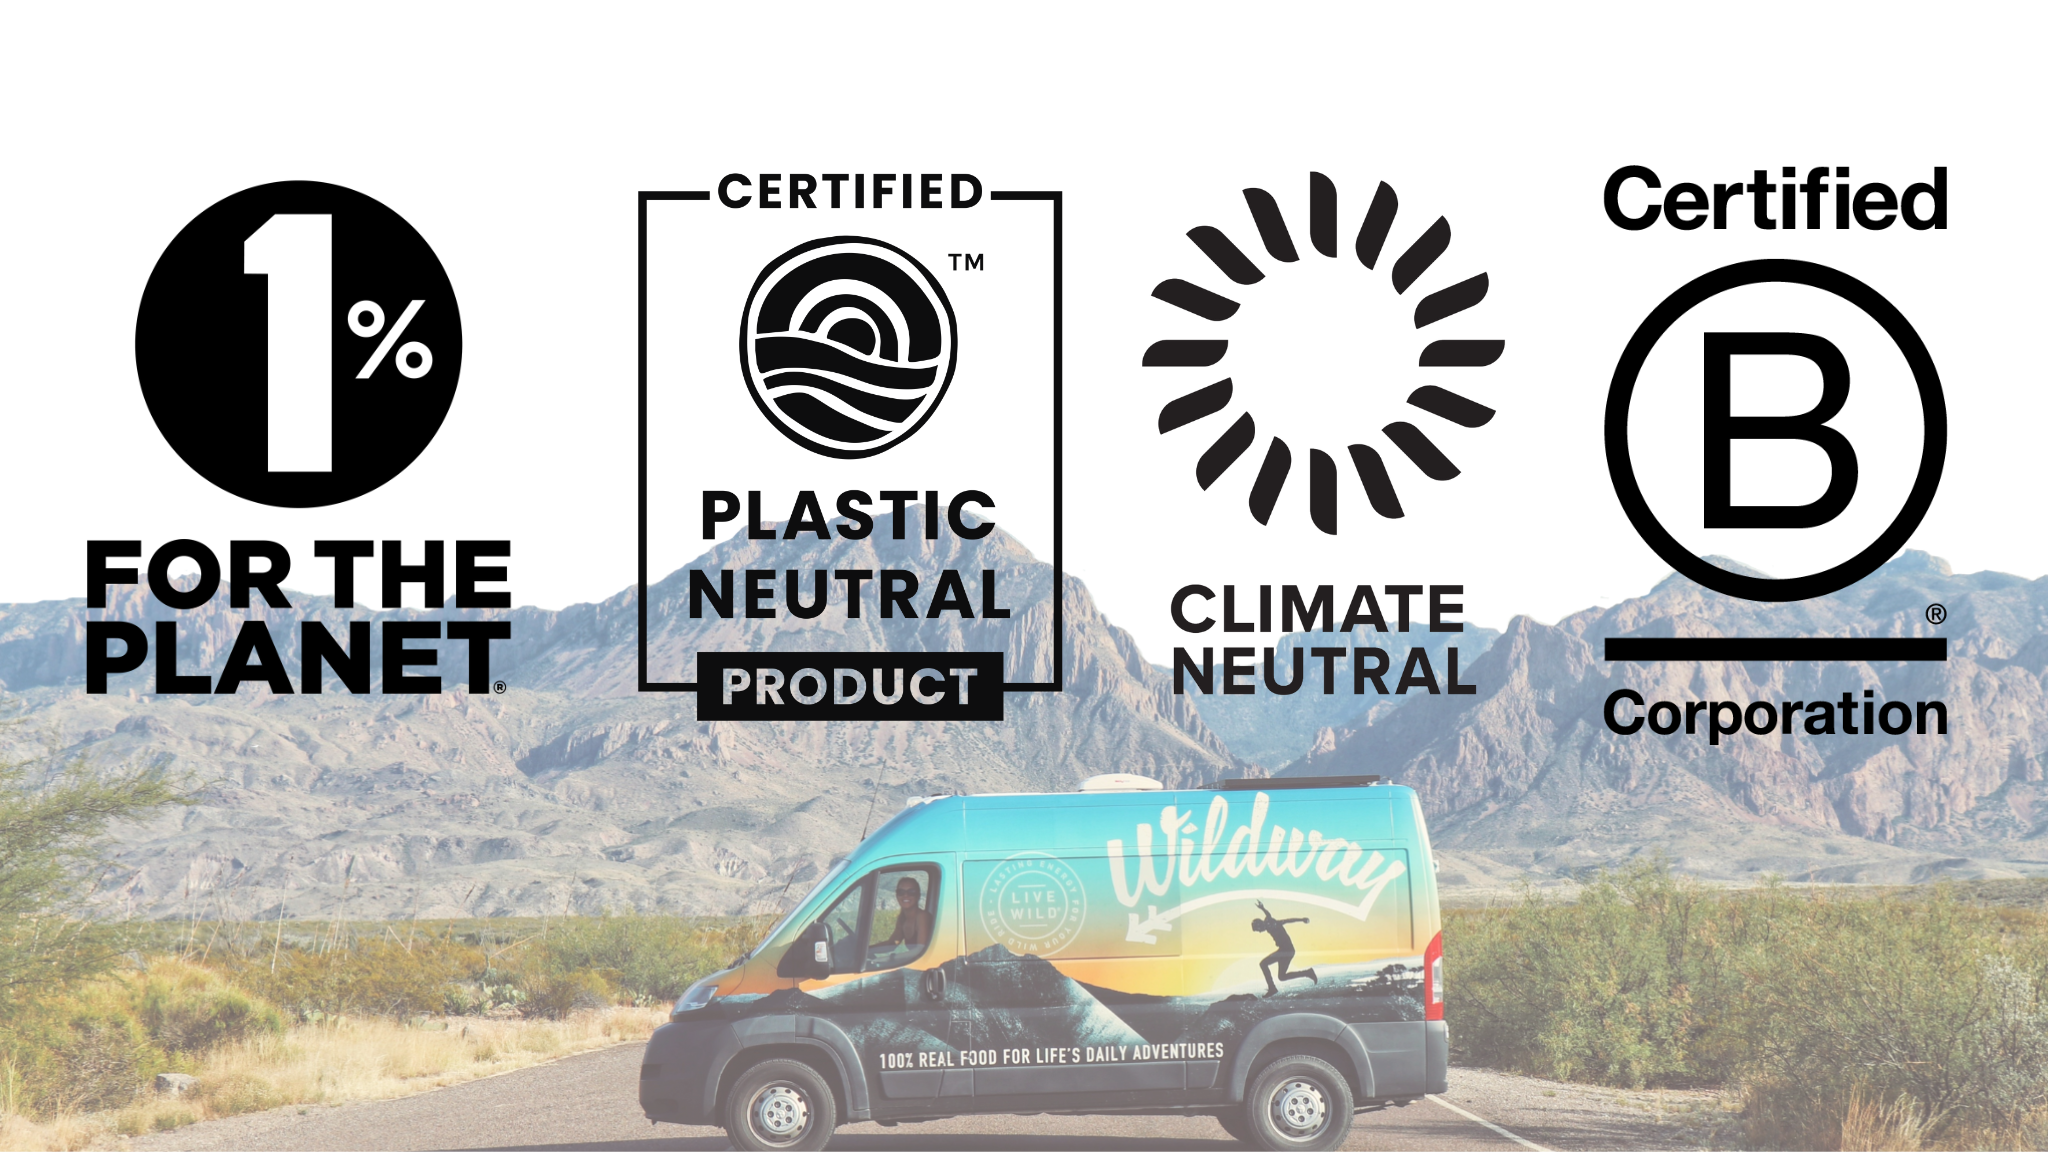 1% for the planet logo, plastic neutral logo, climate neutral logo, B Corporation logo, with Wildway van in the background